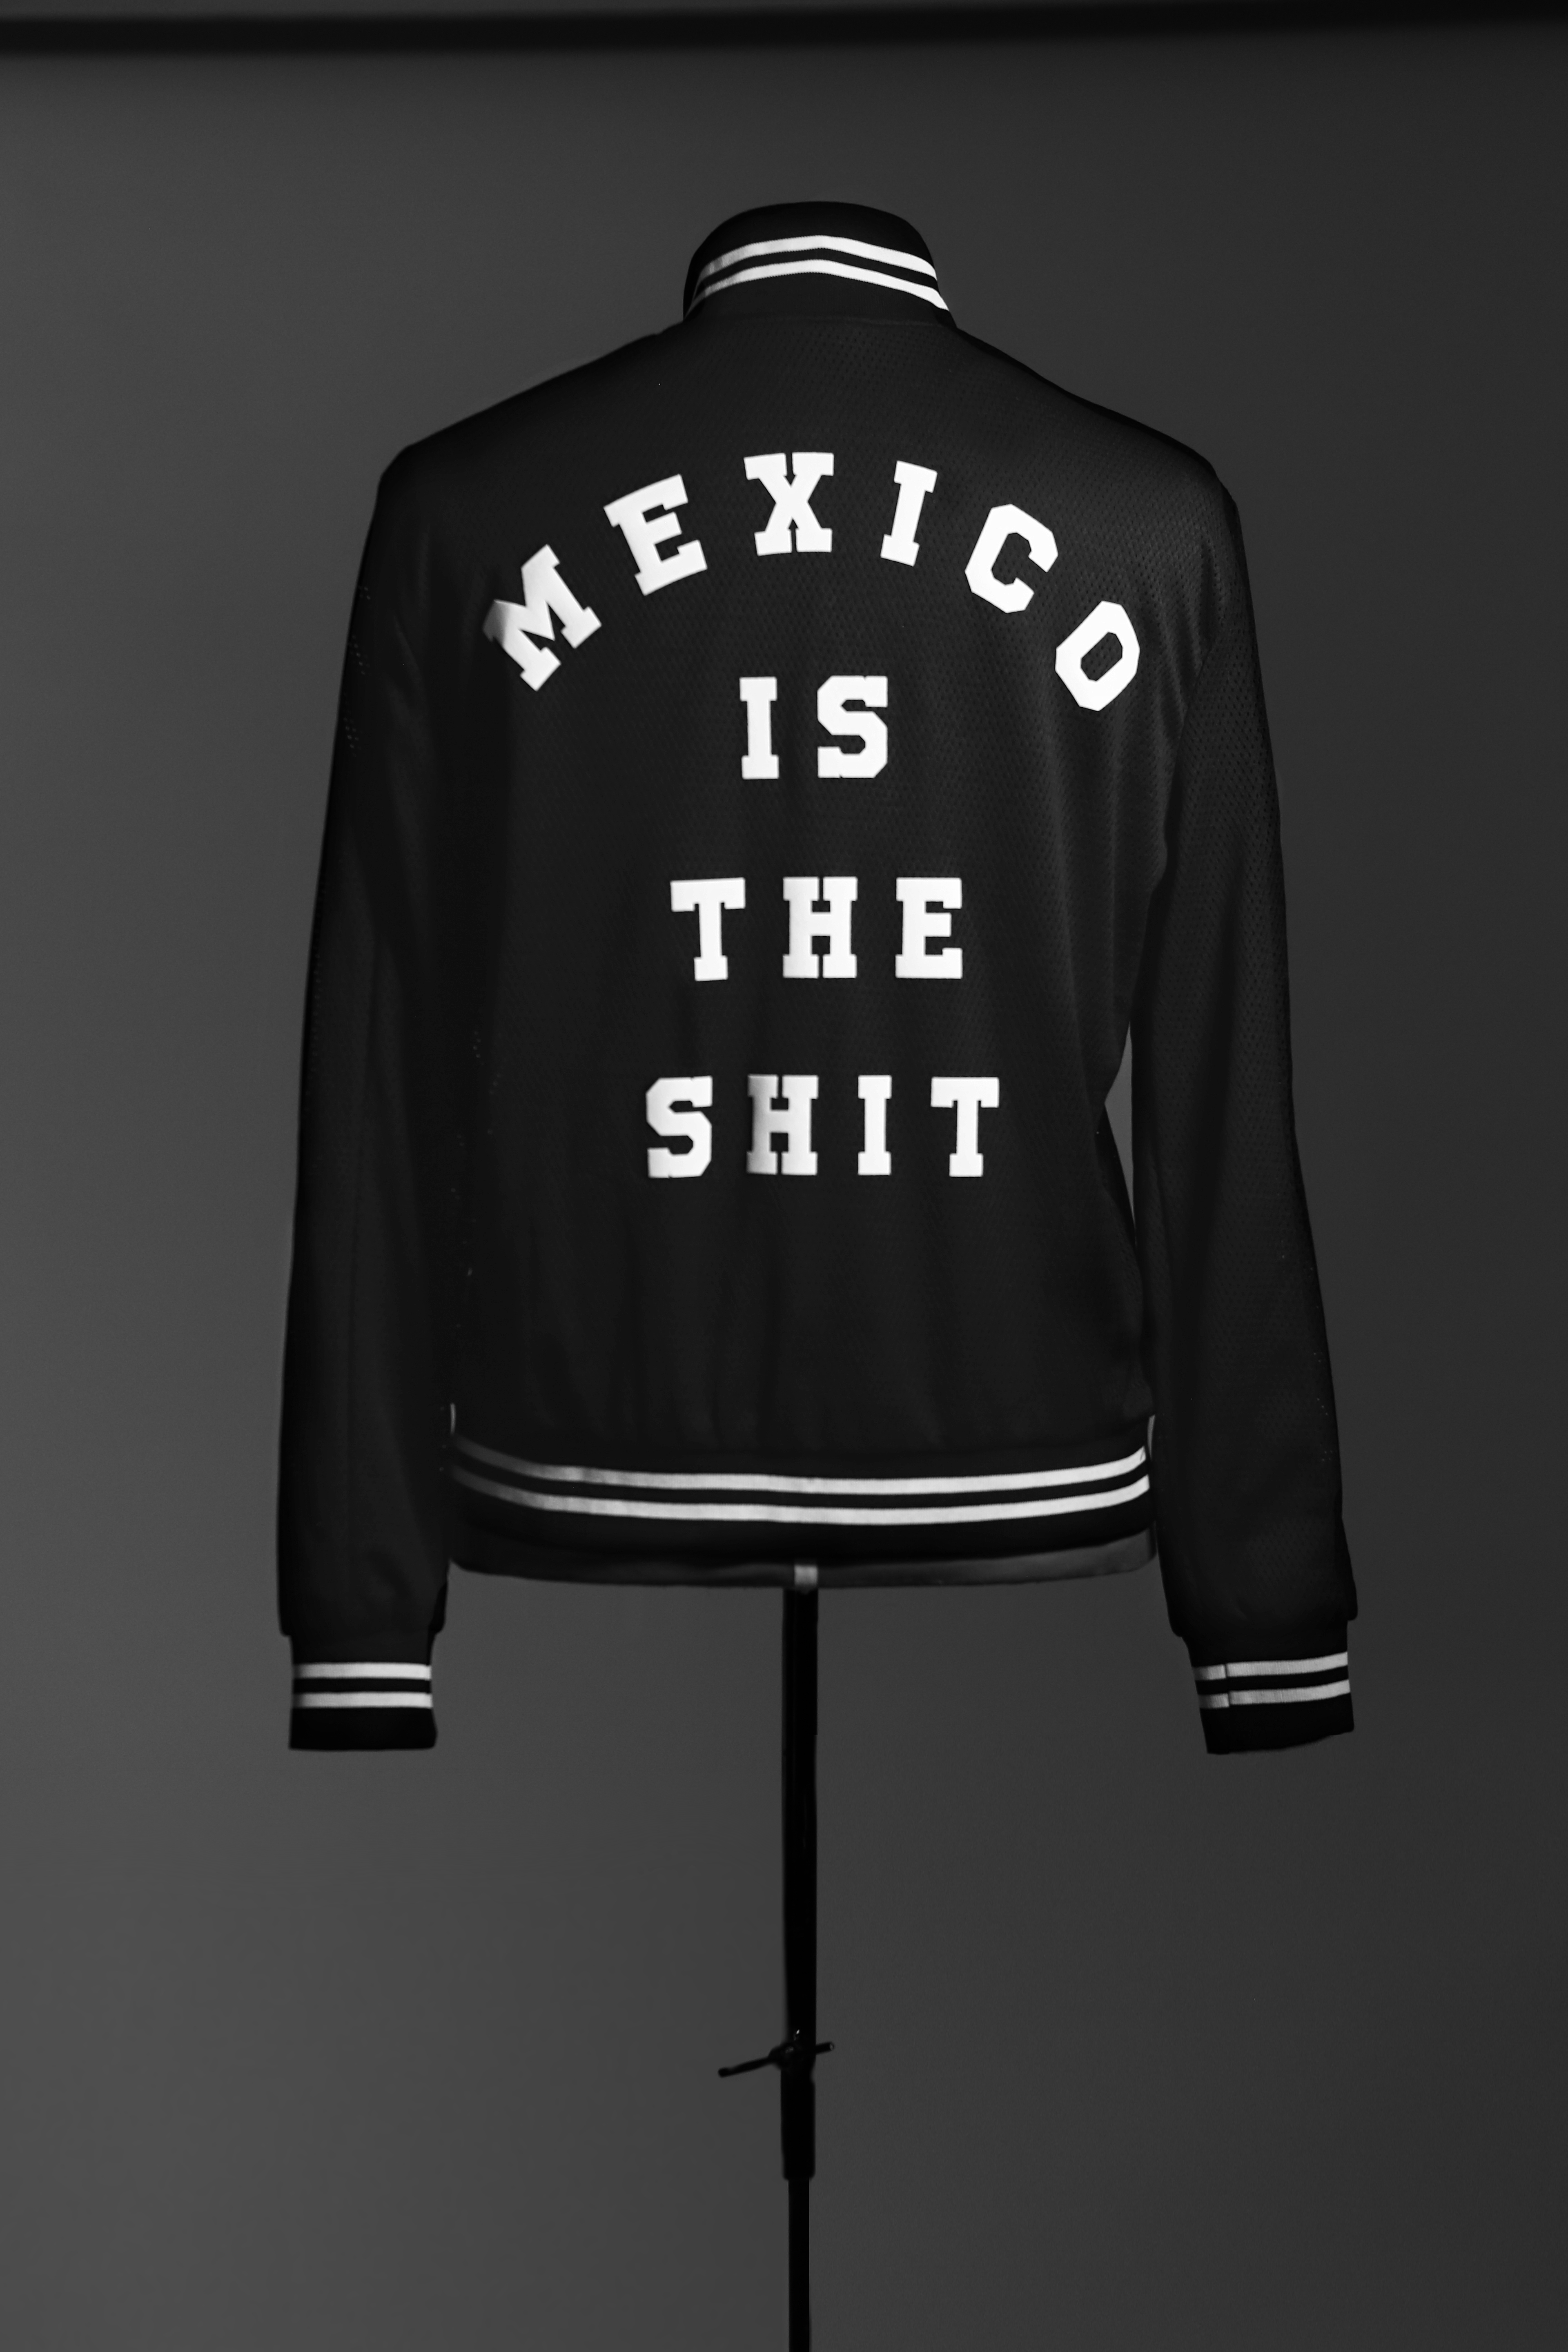 Mexico Is The Shit